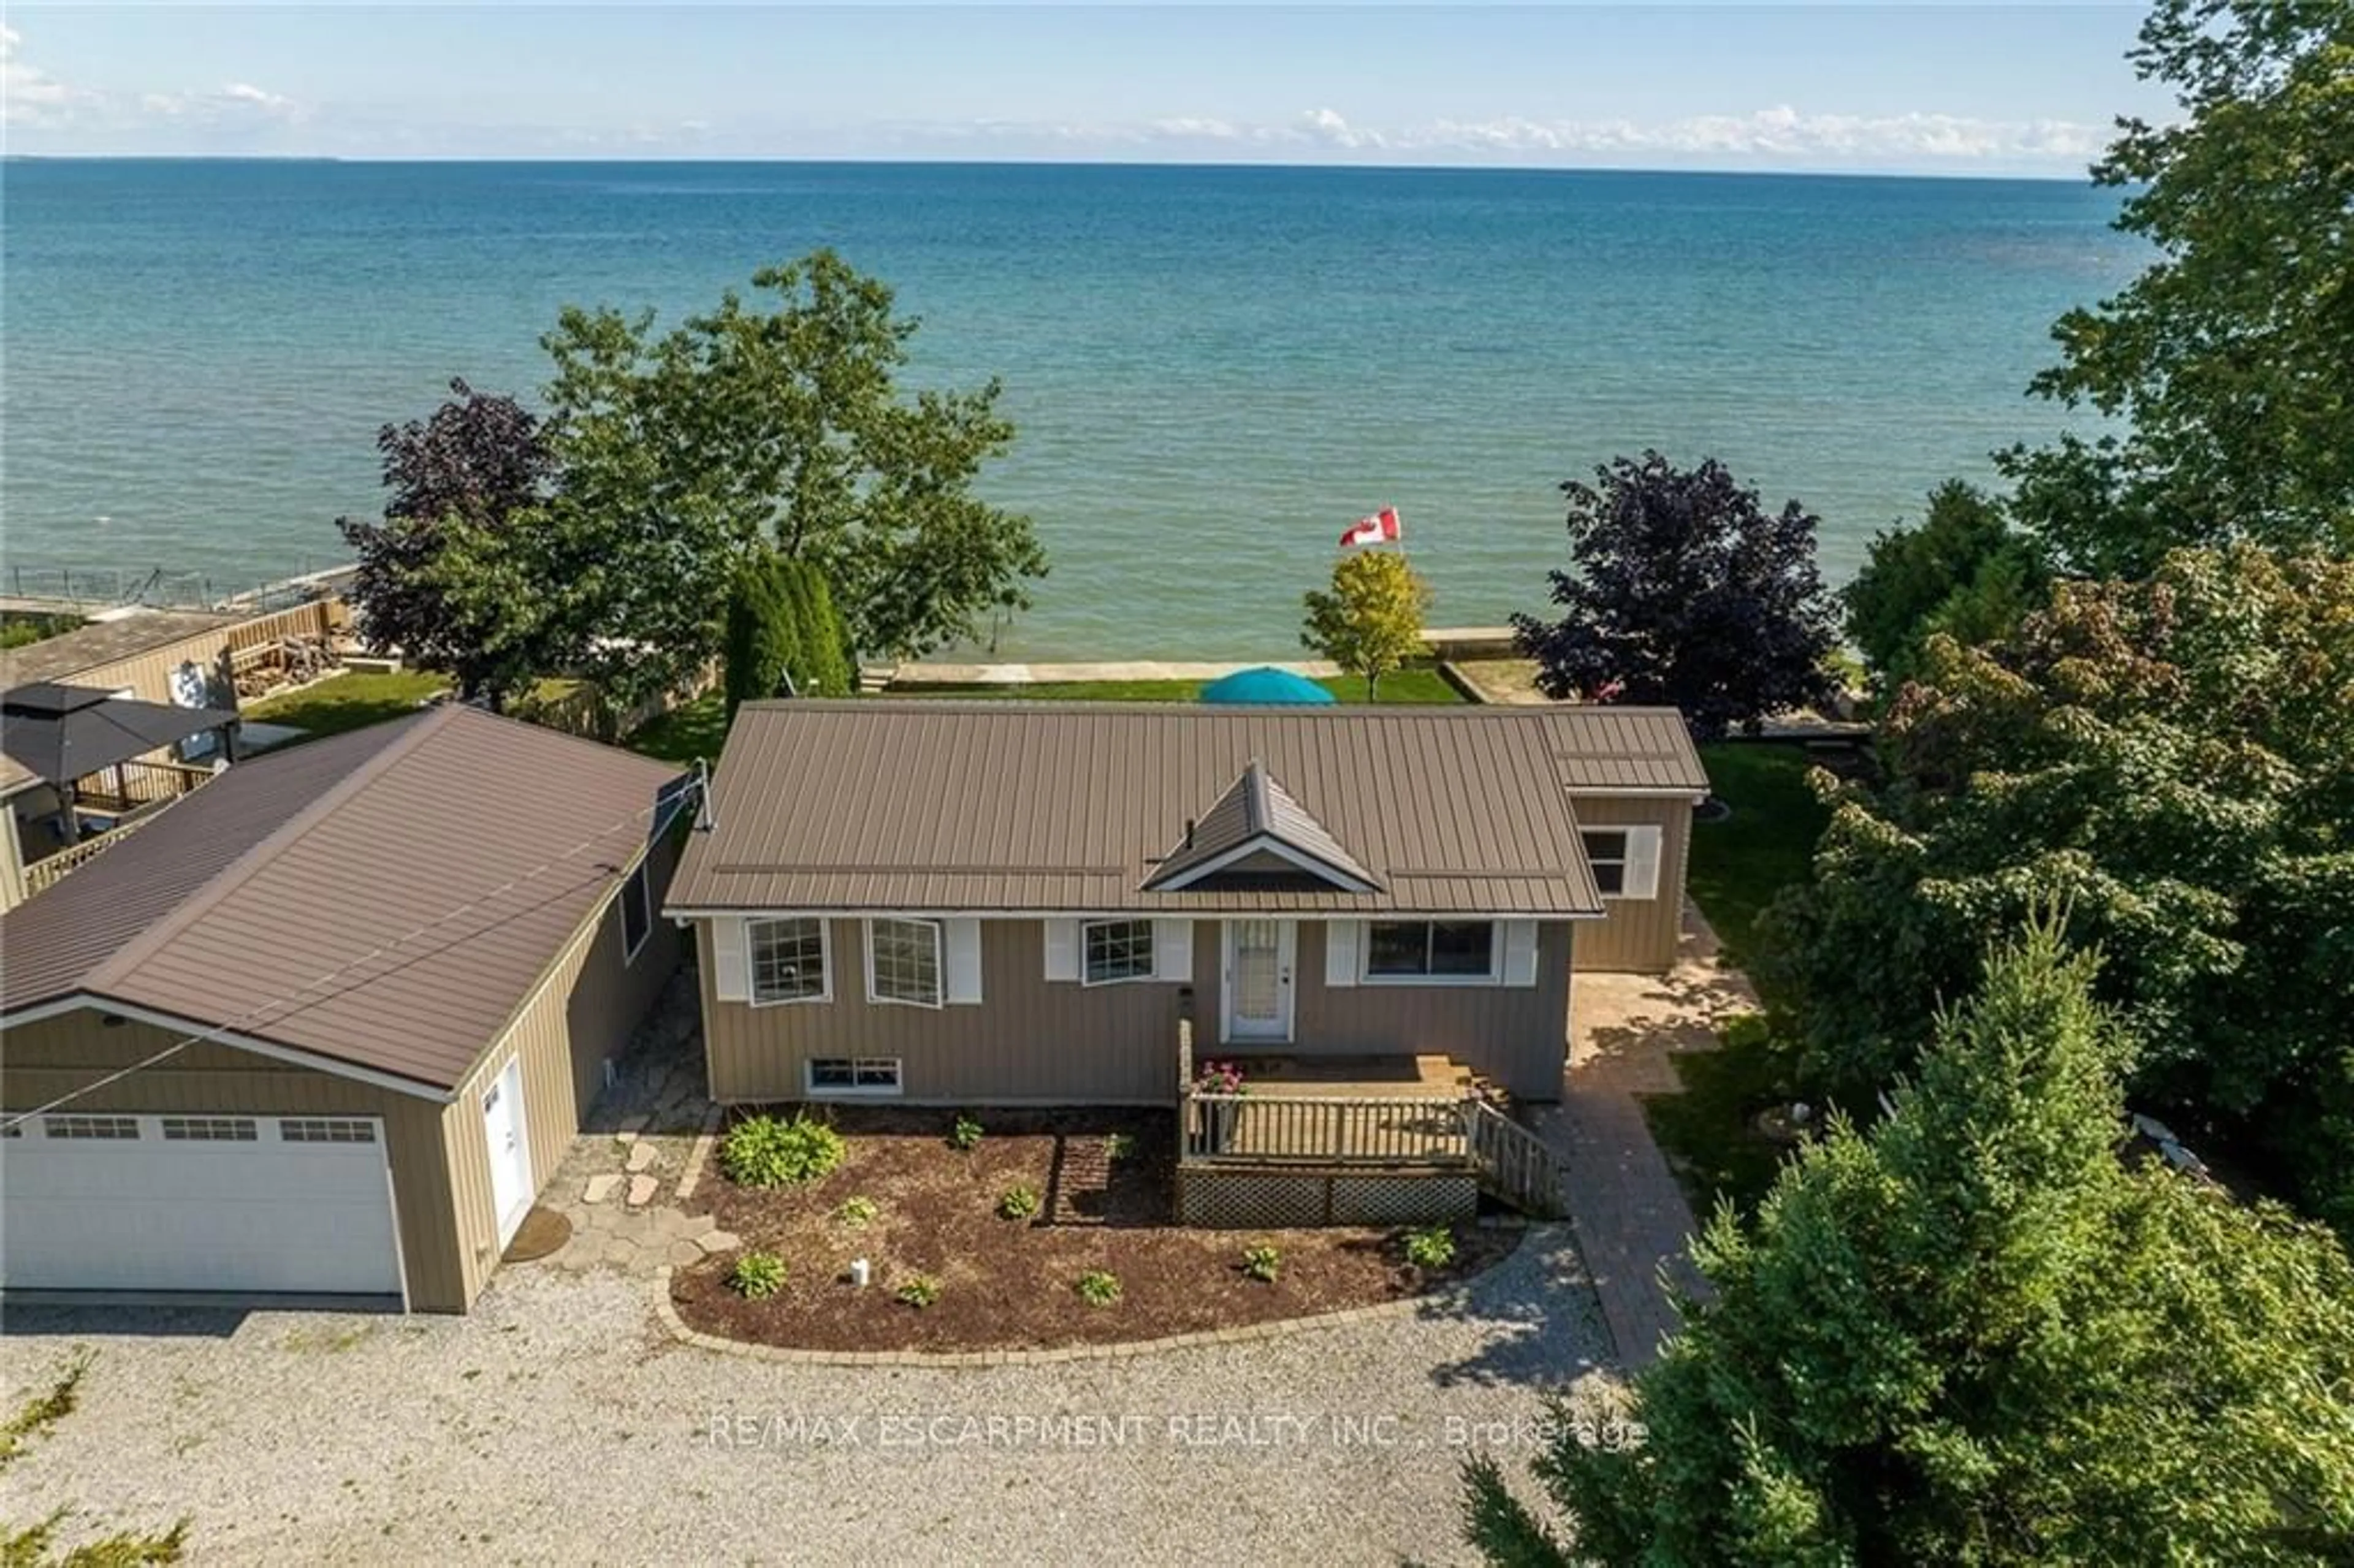 Lakeview for 1146 Lakeshore Rd, Haldimand Ontario N0A 1P0